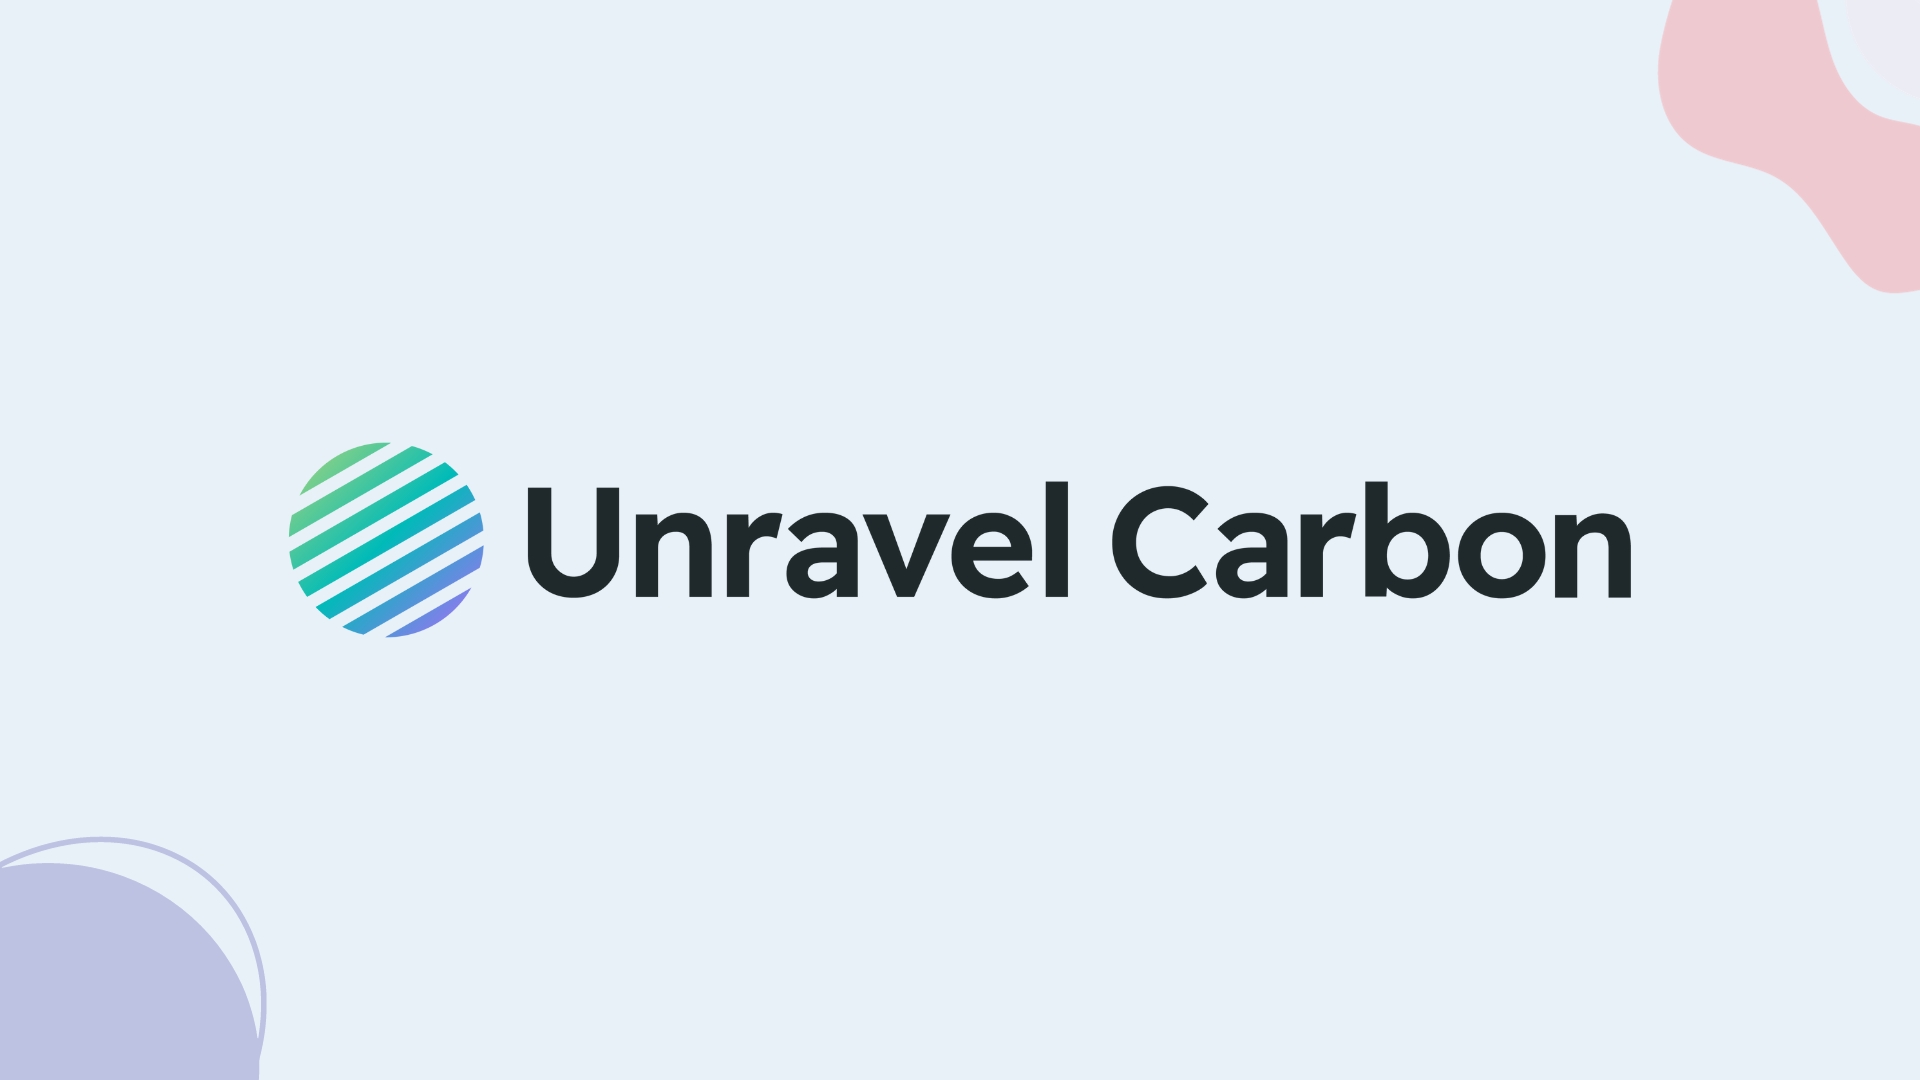 96% More Time for Impact: Omni Empowers Unravel Carbon to Navigate a Greener Future